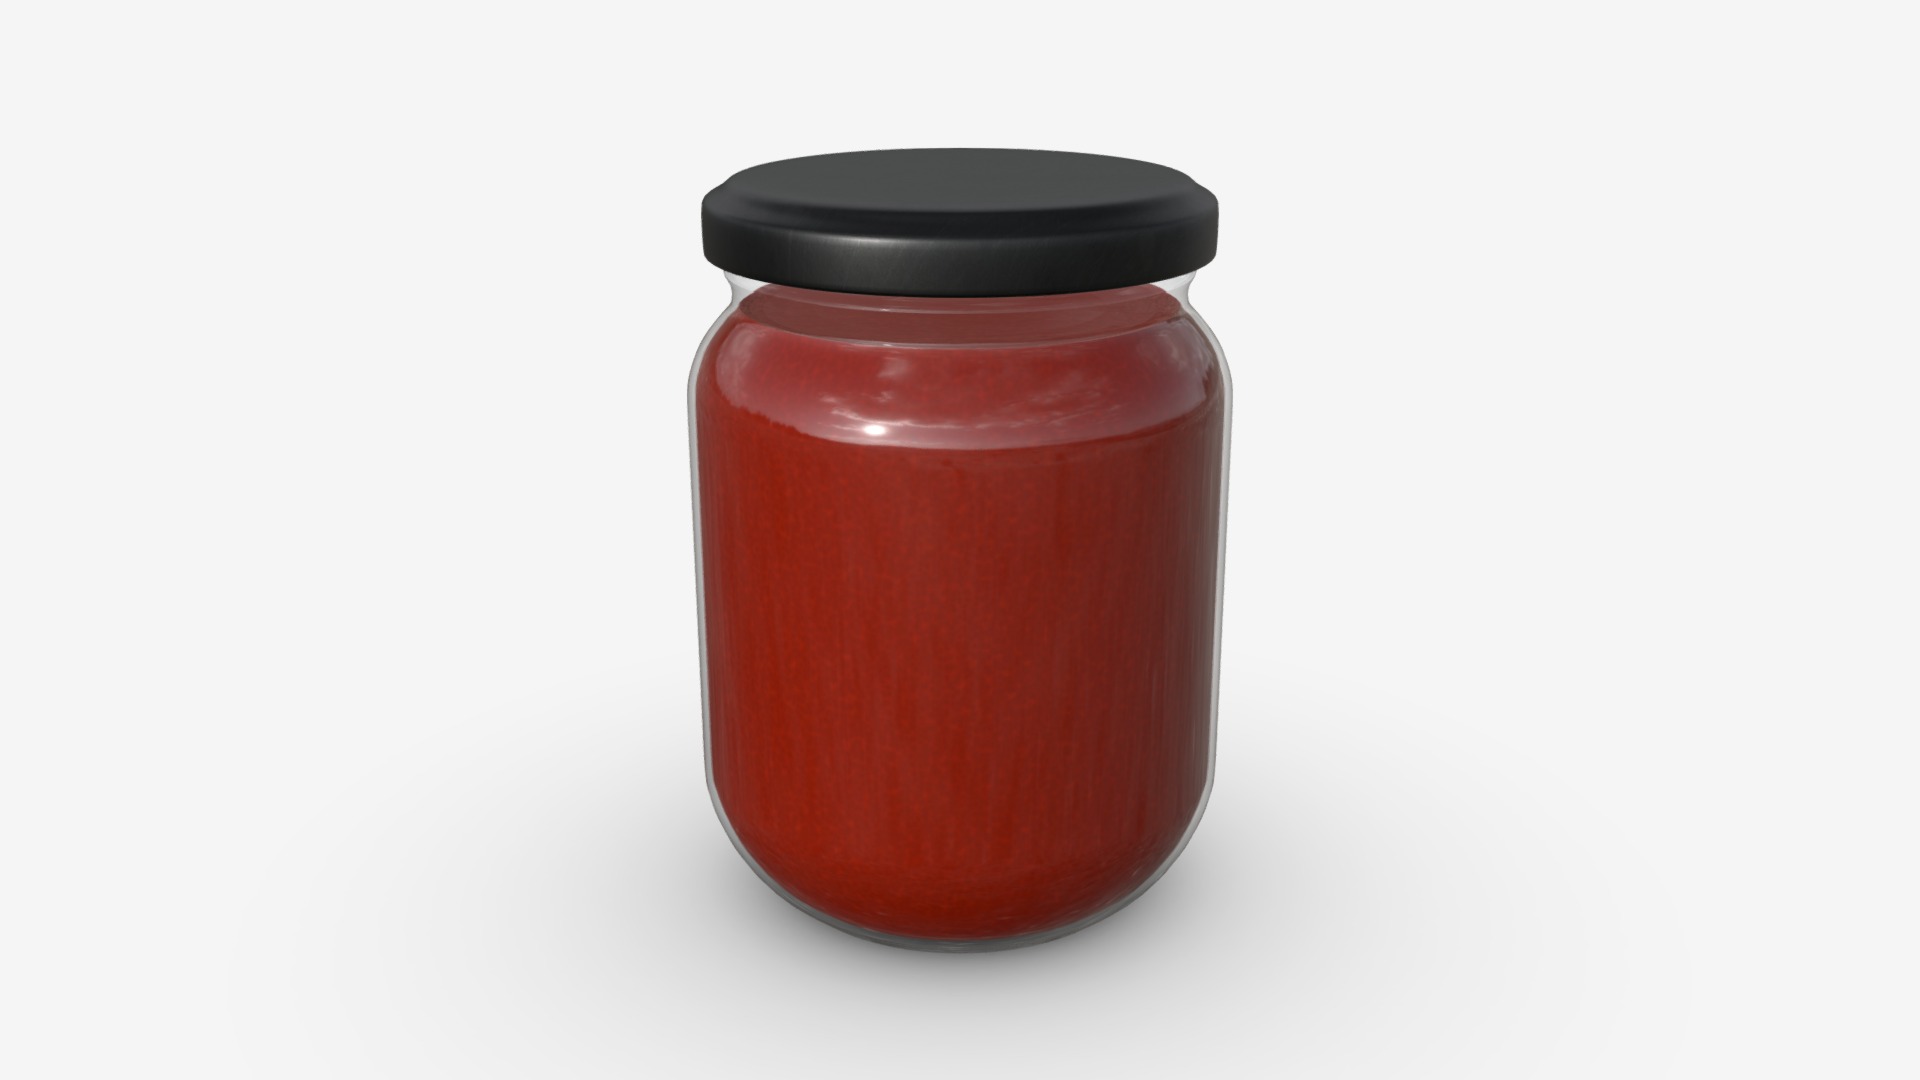 3D model sauce jar - This is a 3D model of the sauce jar. The 3D model is about a red container with a black lid.